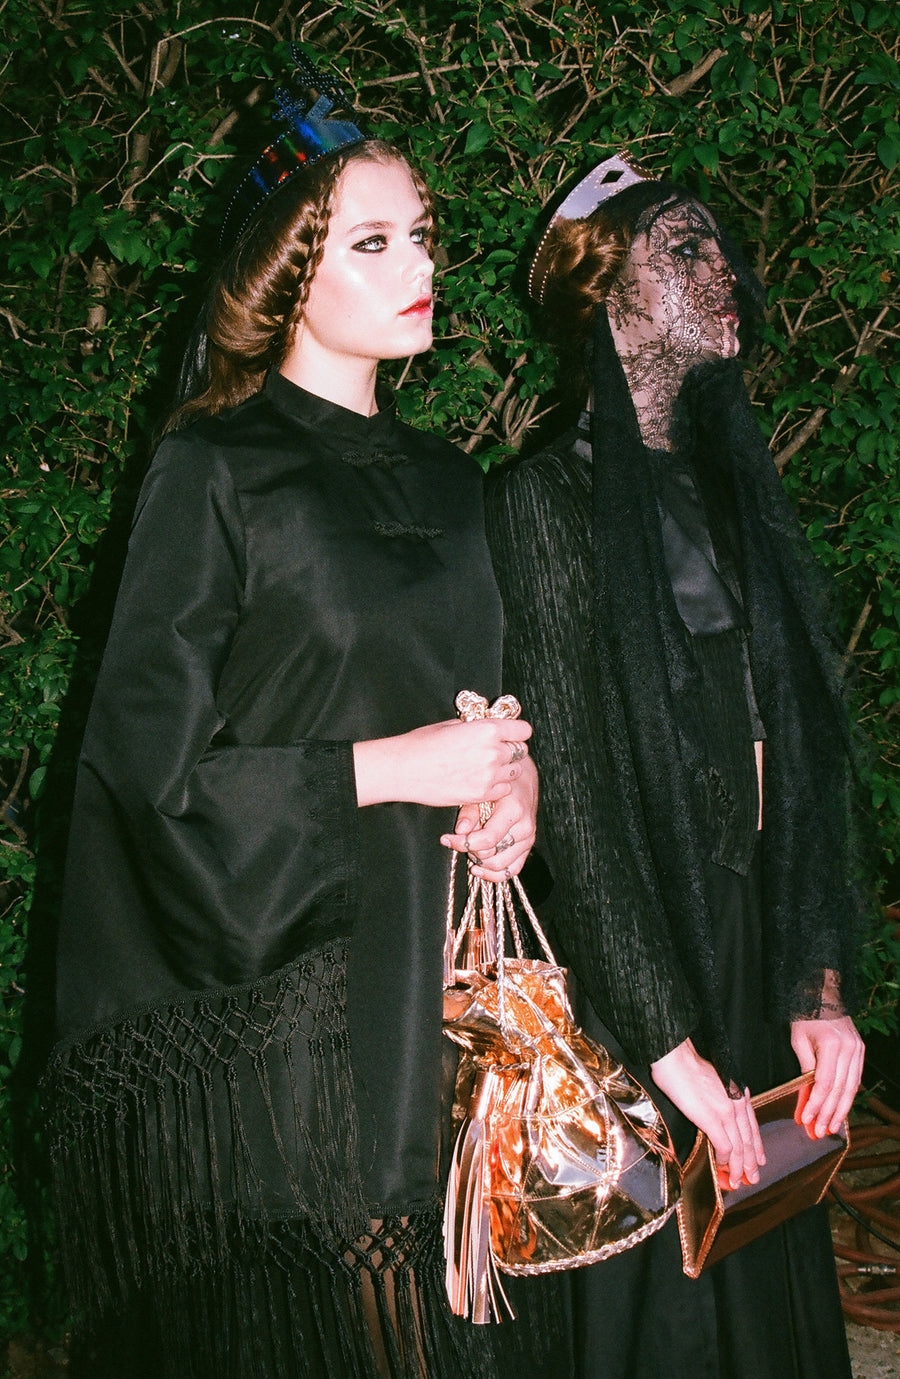 Solveig IMG Model Wendy Nichol First Fashion Runway Show SS14 Saints of the Zodiac Astrological Sign Pisces Fringe Cape Kimono Jacket Silk Tulle Sheer Black Veil Leather Queen Crown Elizabethan Victorian Gothic Sea Witch High Priestess Copper Metallic Bullet Bucket Bag Handmade in NYC New York City Bespoke Made to Measure Order Custom Tailoring Ali Aliana Lohan 